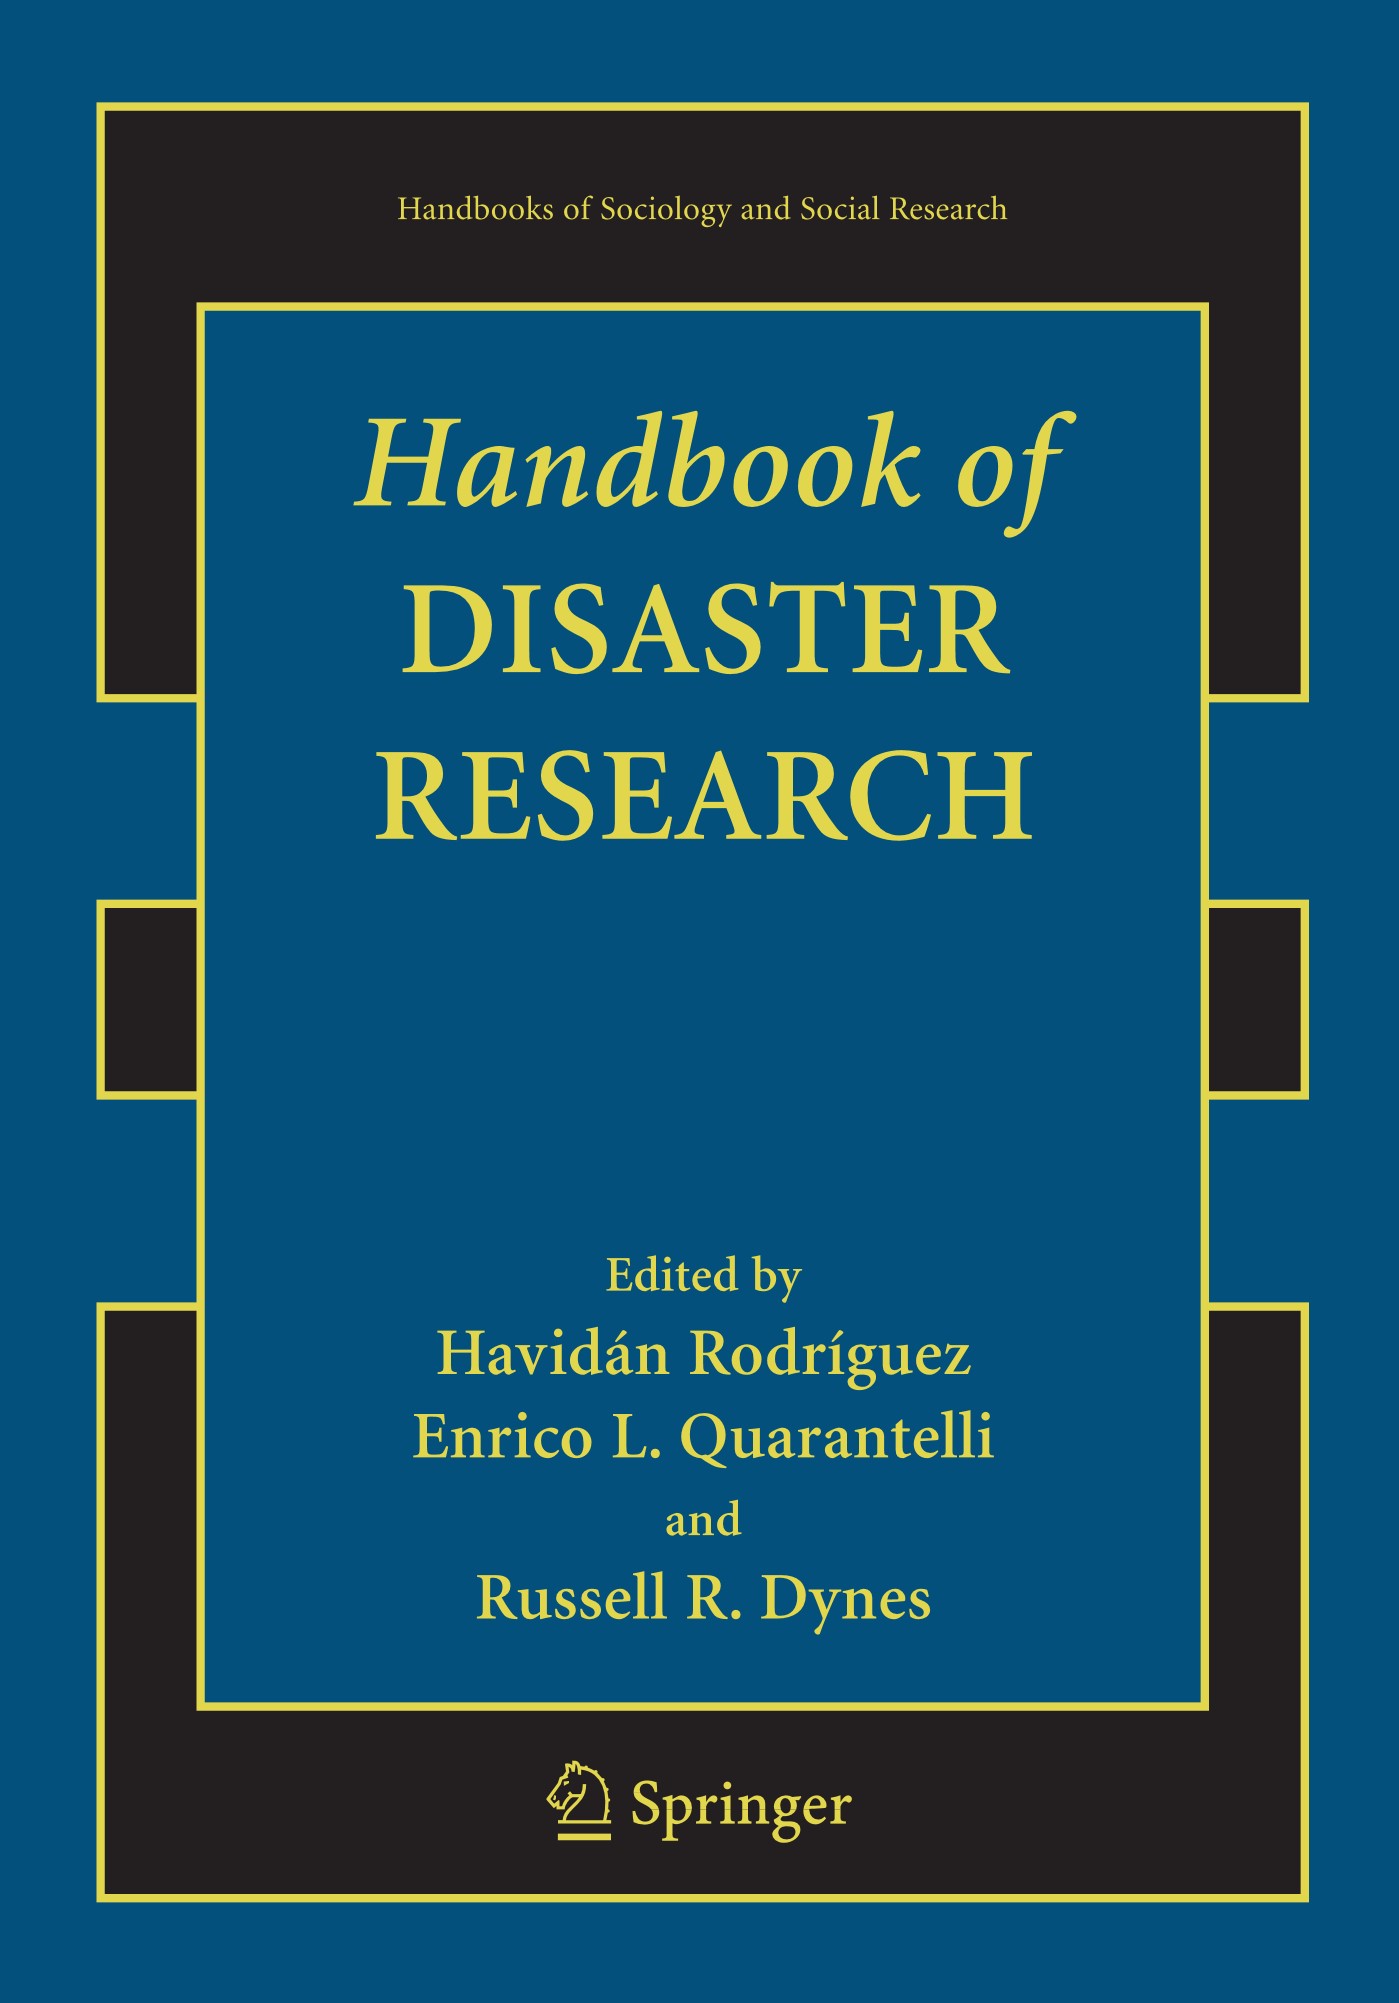 the first disaster research case study was